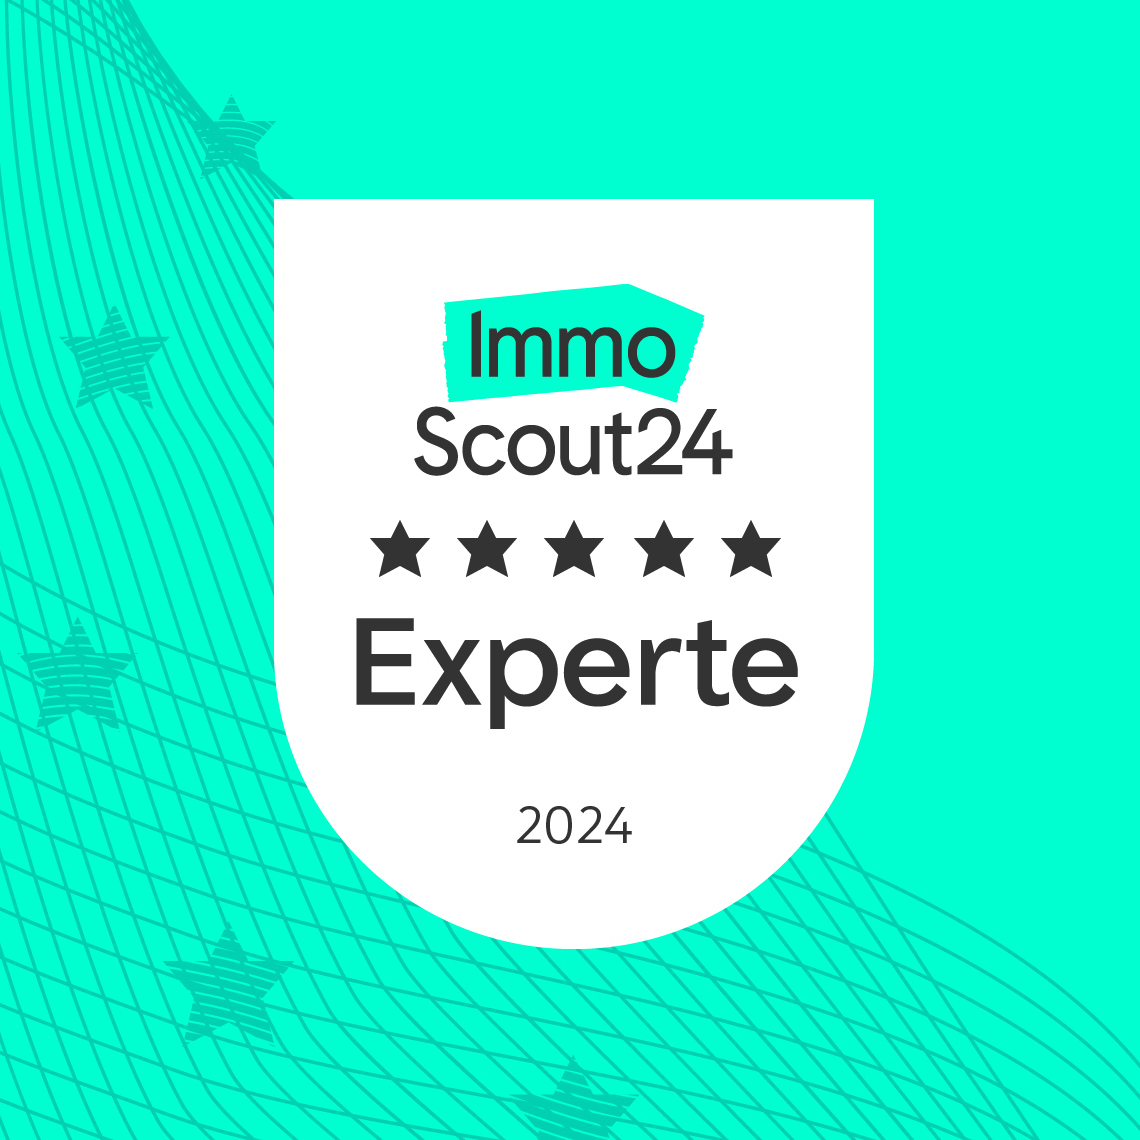 ImmoScout24 Experte 2024